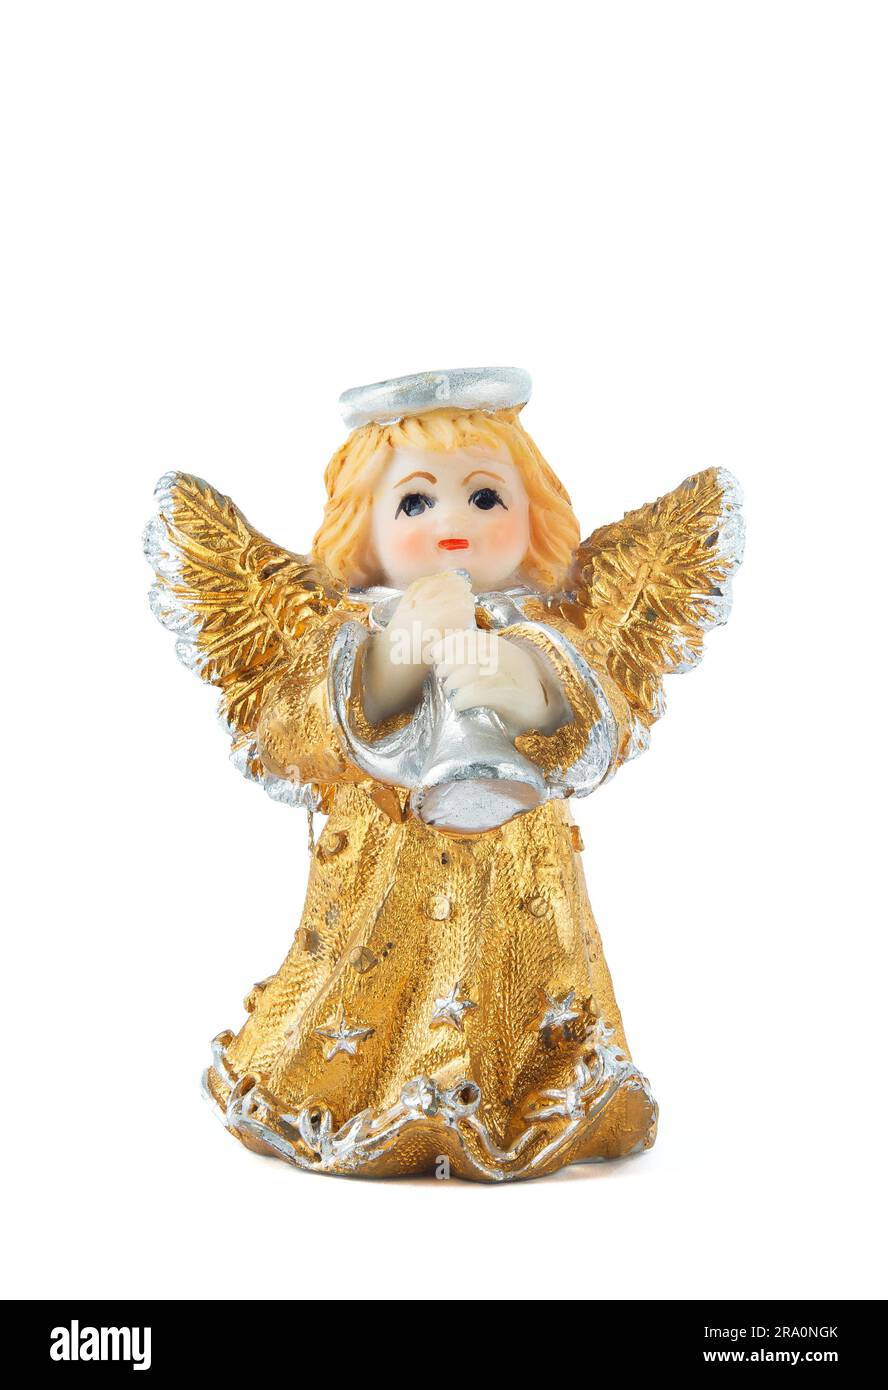 A little miniature statue of a colorful angel with wings and halo, playing the trumpet Stock Photo